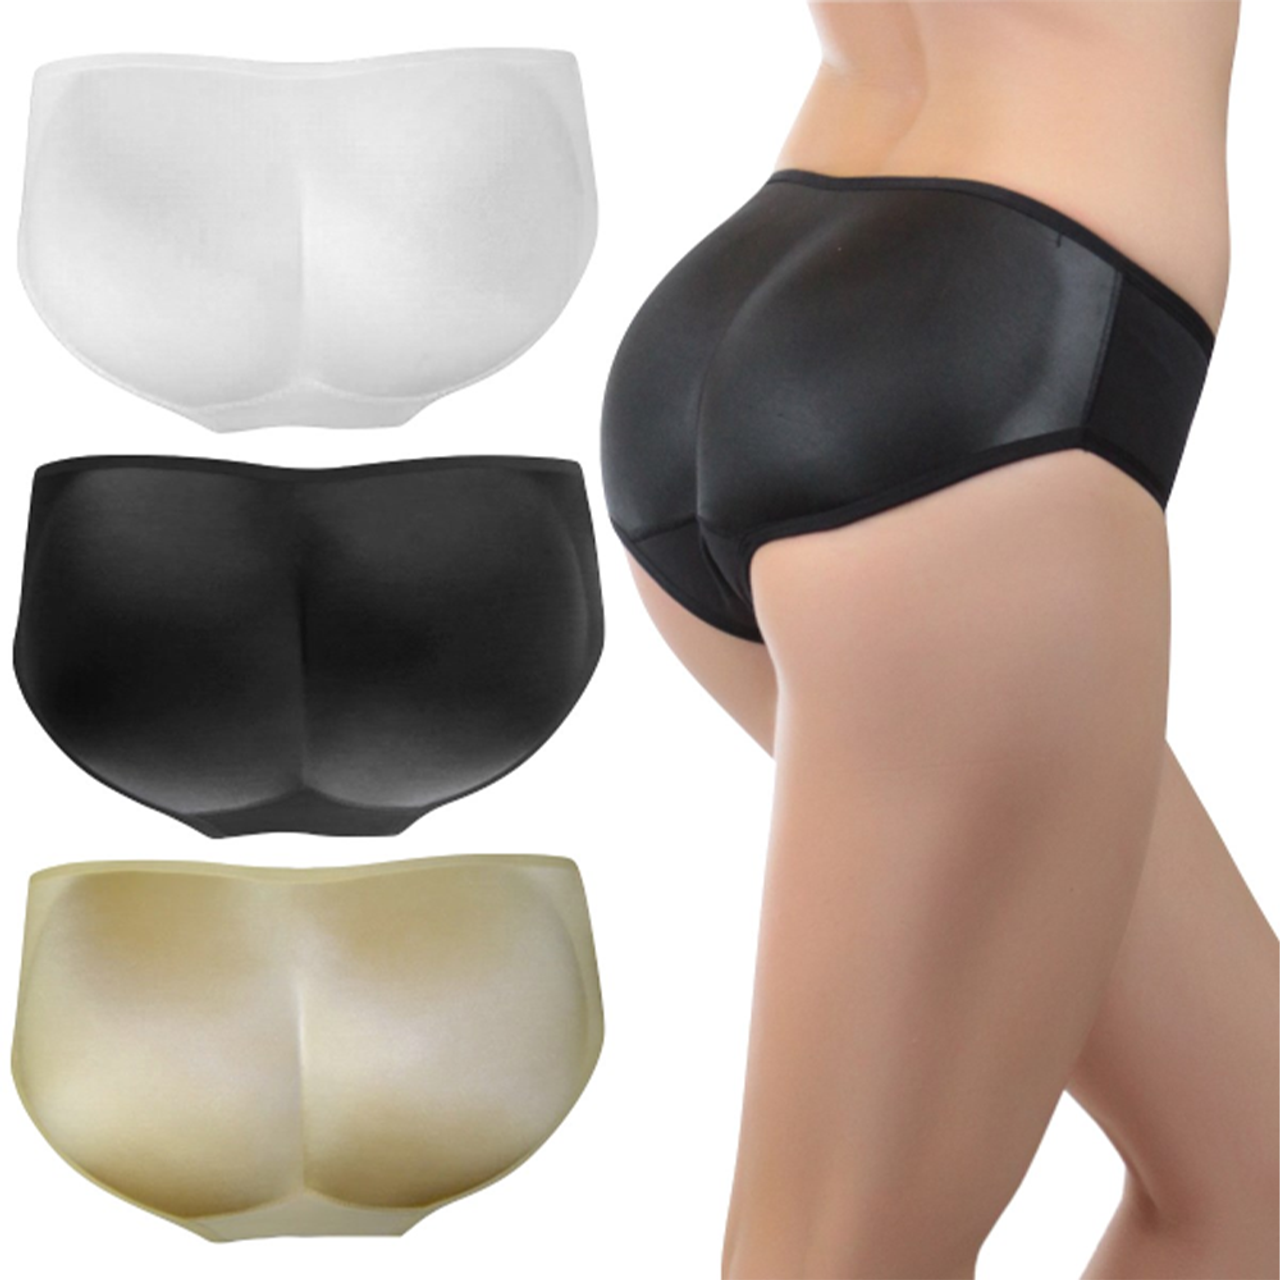 Women's Padded Panty Brief Instant Butt Booster product image